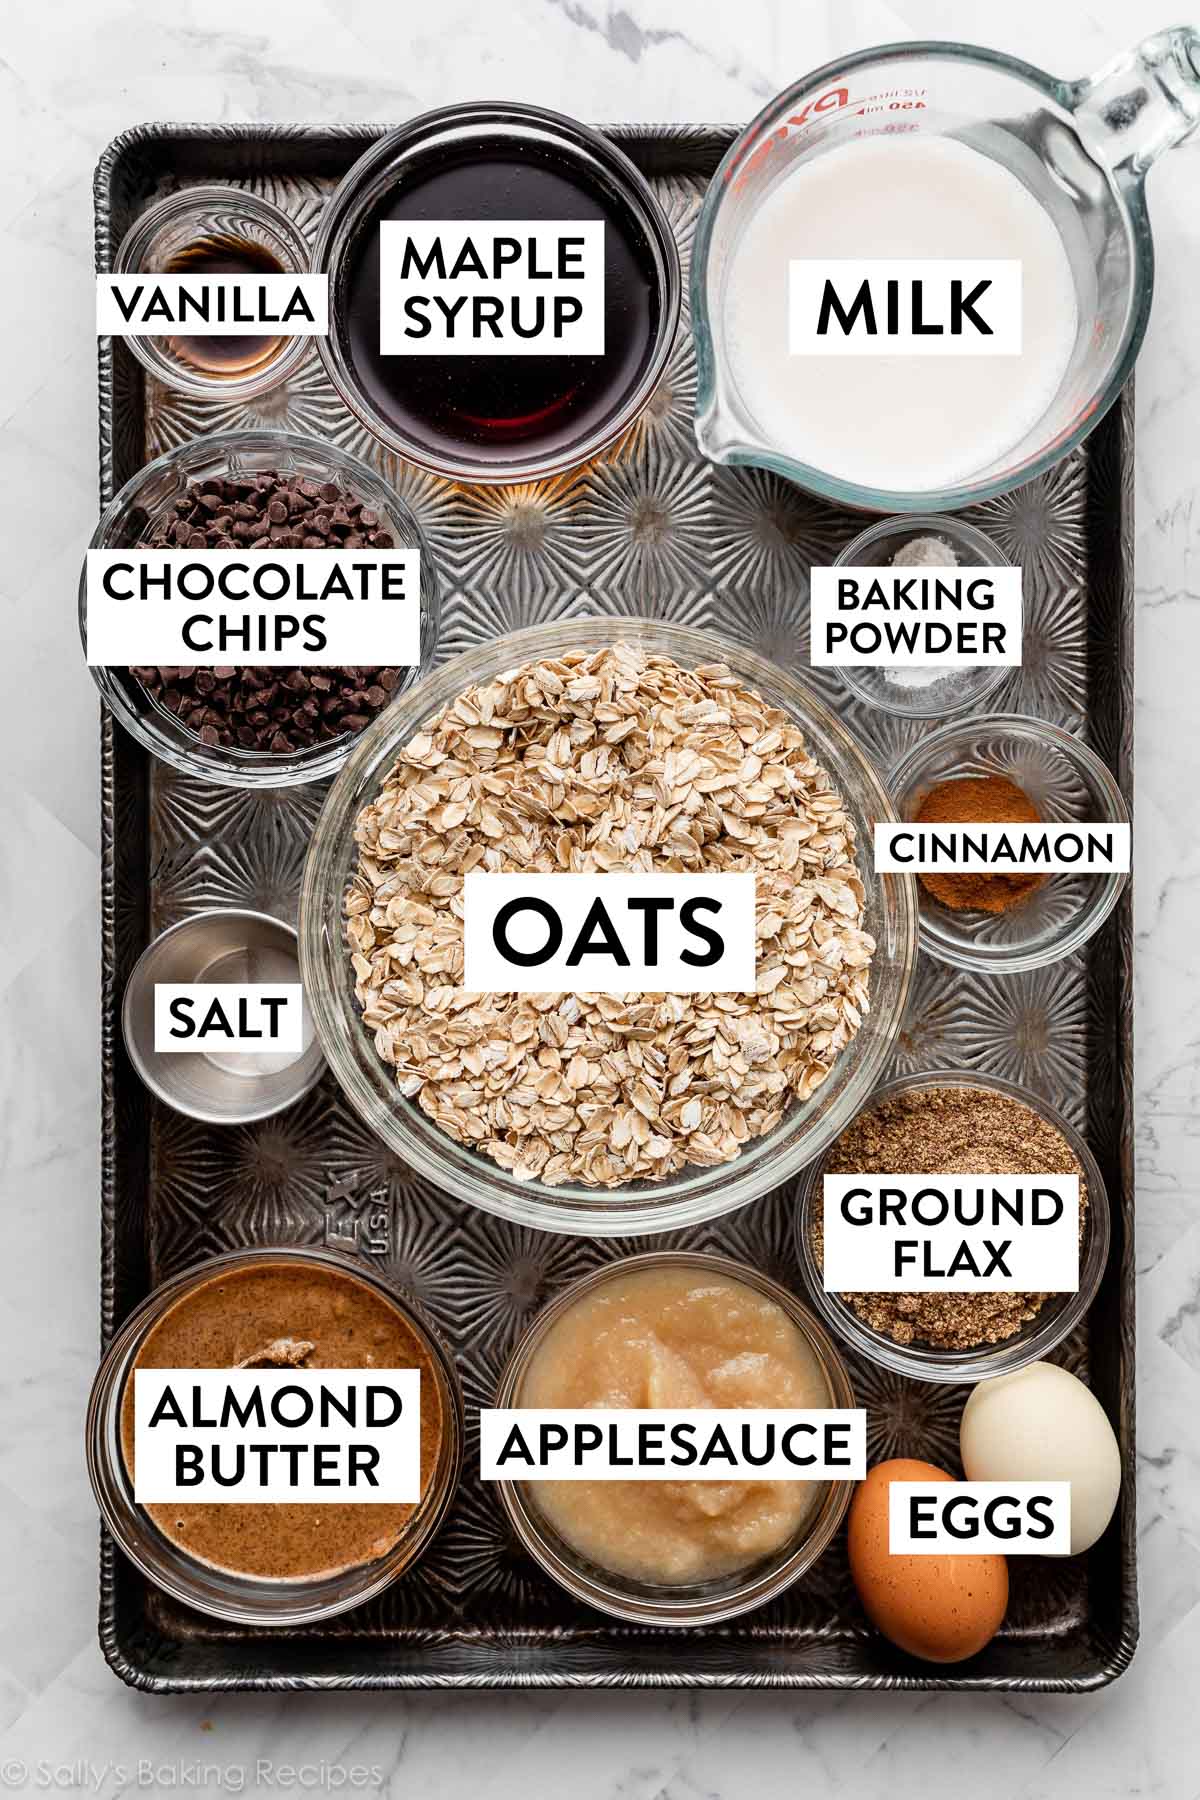 ingredients on baking sheet including milk, oats, ground flax, almond butter, applesauce, eggs, maple syrup, and more.